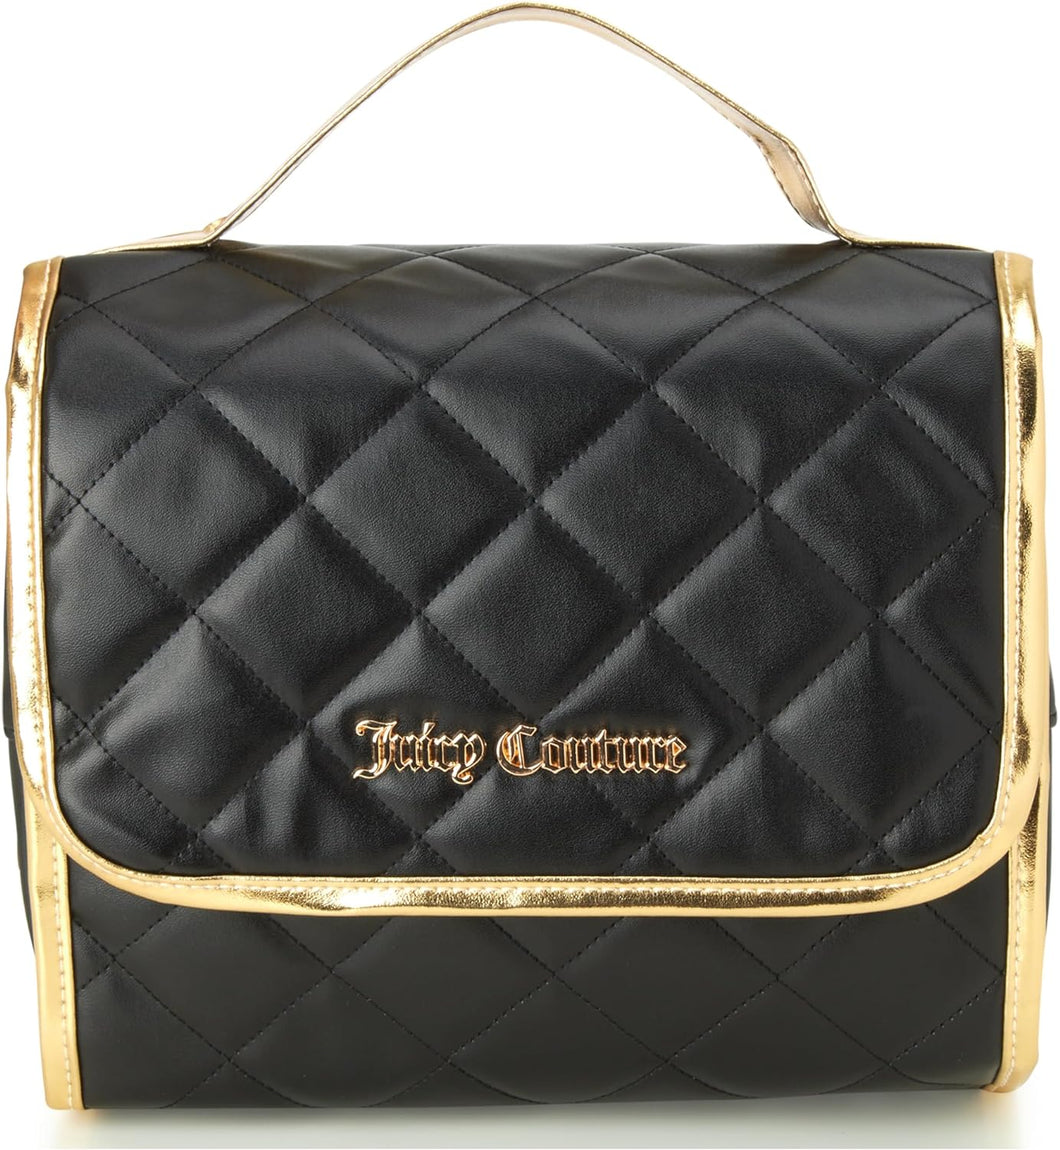 Juicy Couture Women's Hanging Cosmetics Bag - Travel Makeup and Toiletries Train Case Organizer